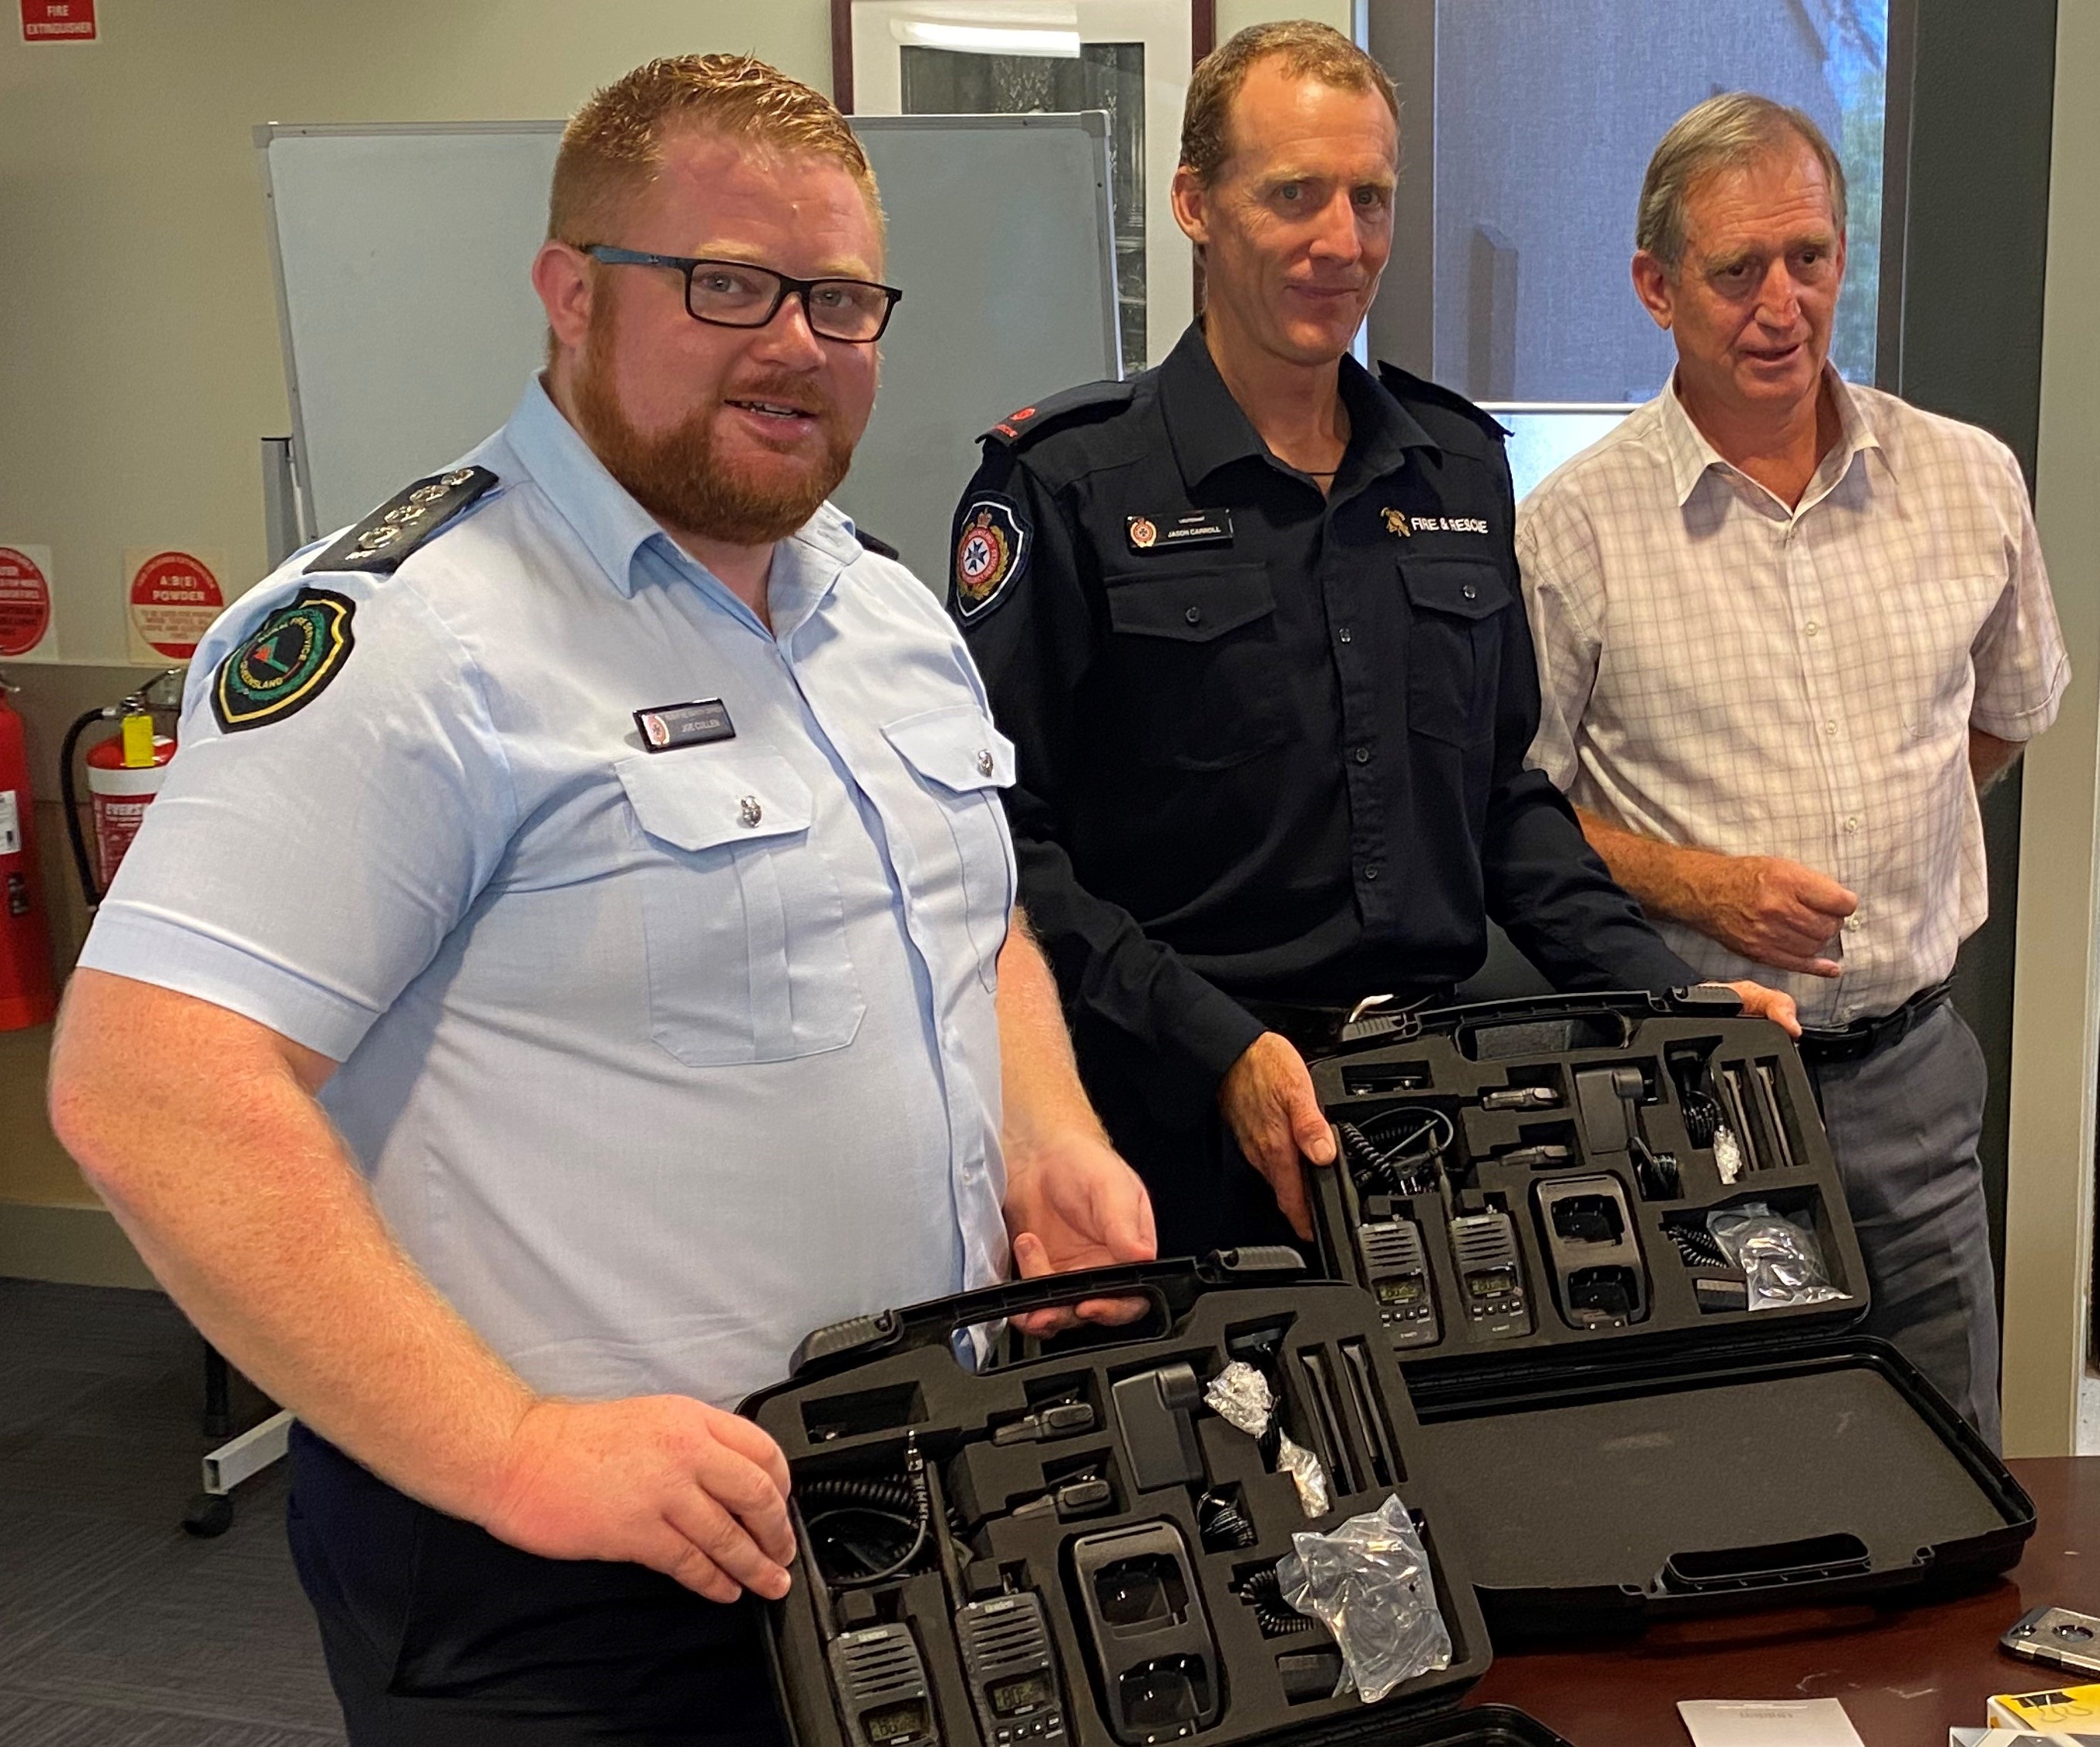 The radios were presented by Cr Scott at a recent meeting of the LDMG to Joe Cullen, Acting Inspector, Area Director of Cairns Peninsular Area Rural Fire Service, and Jason Carroll Captain of the Cooktown Auxiliary Fire Brigade. 